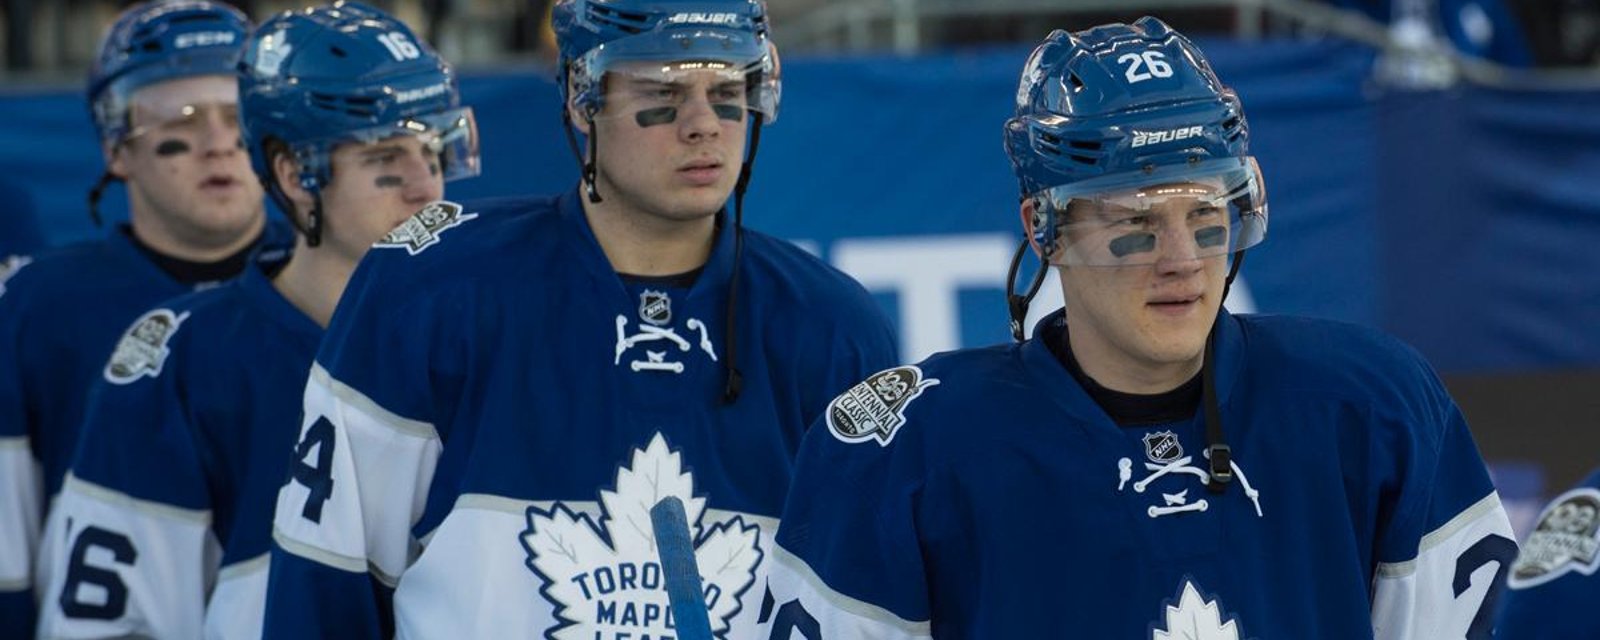 Leafs' rookies are making history in Toronto. 